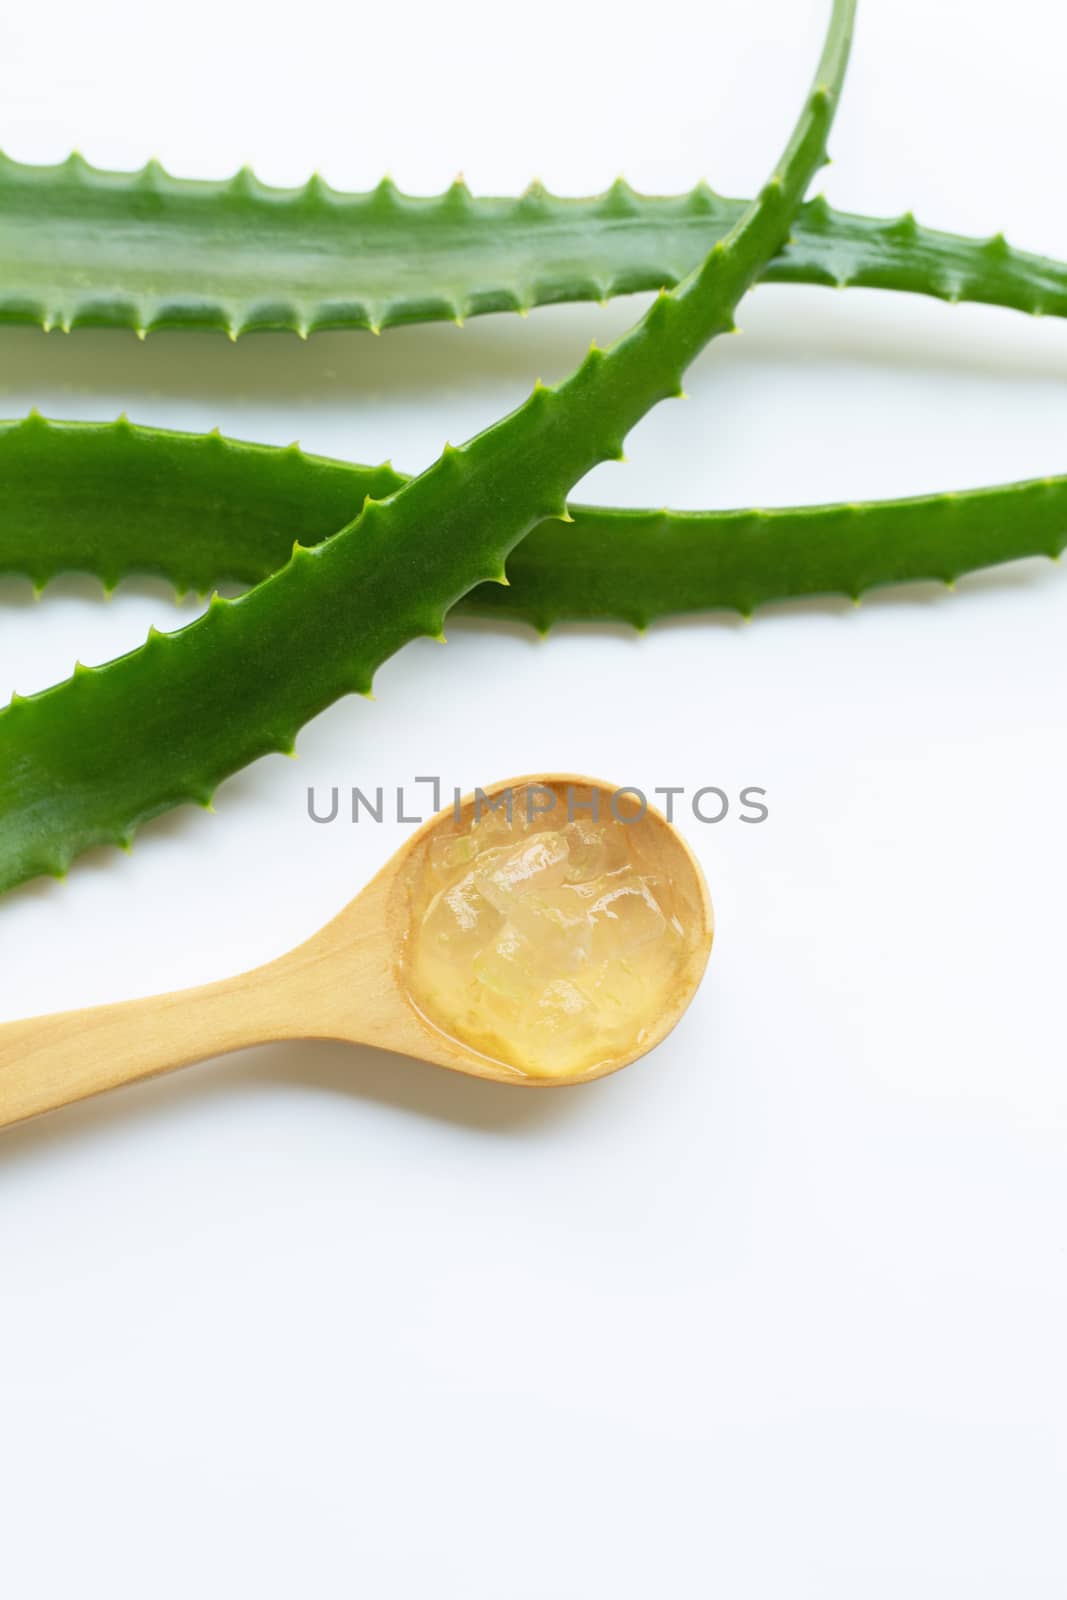 Aloe vera is a popular medicinal plant for health and beauty, wh by Bowonpat